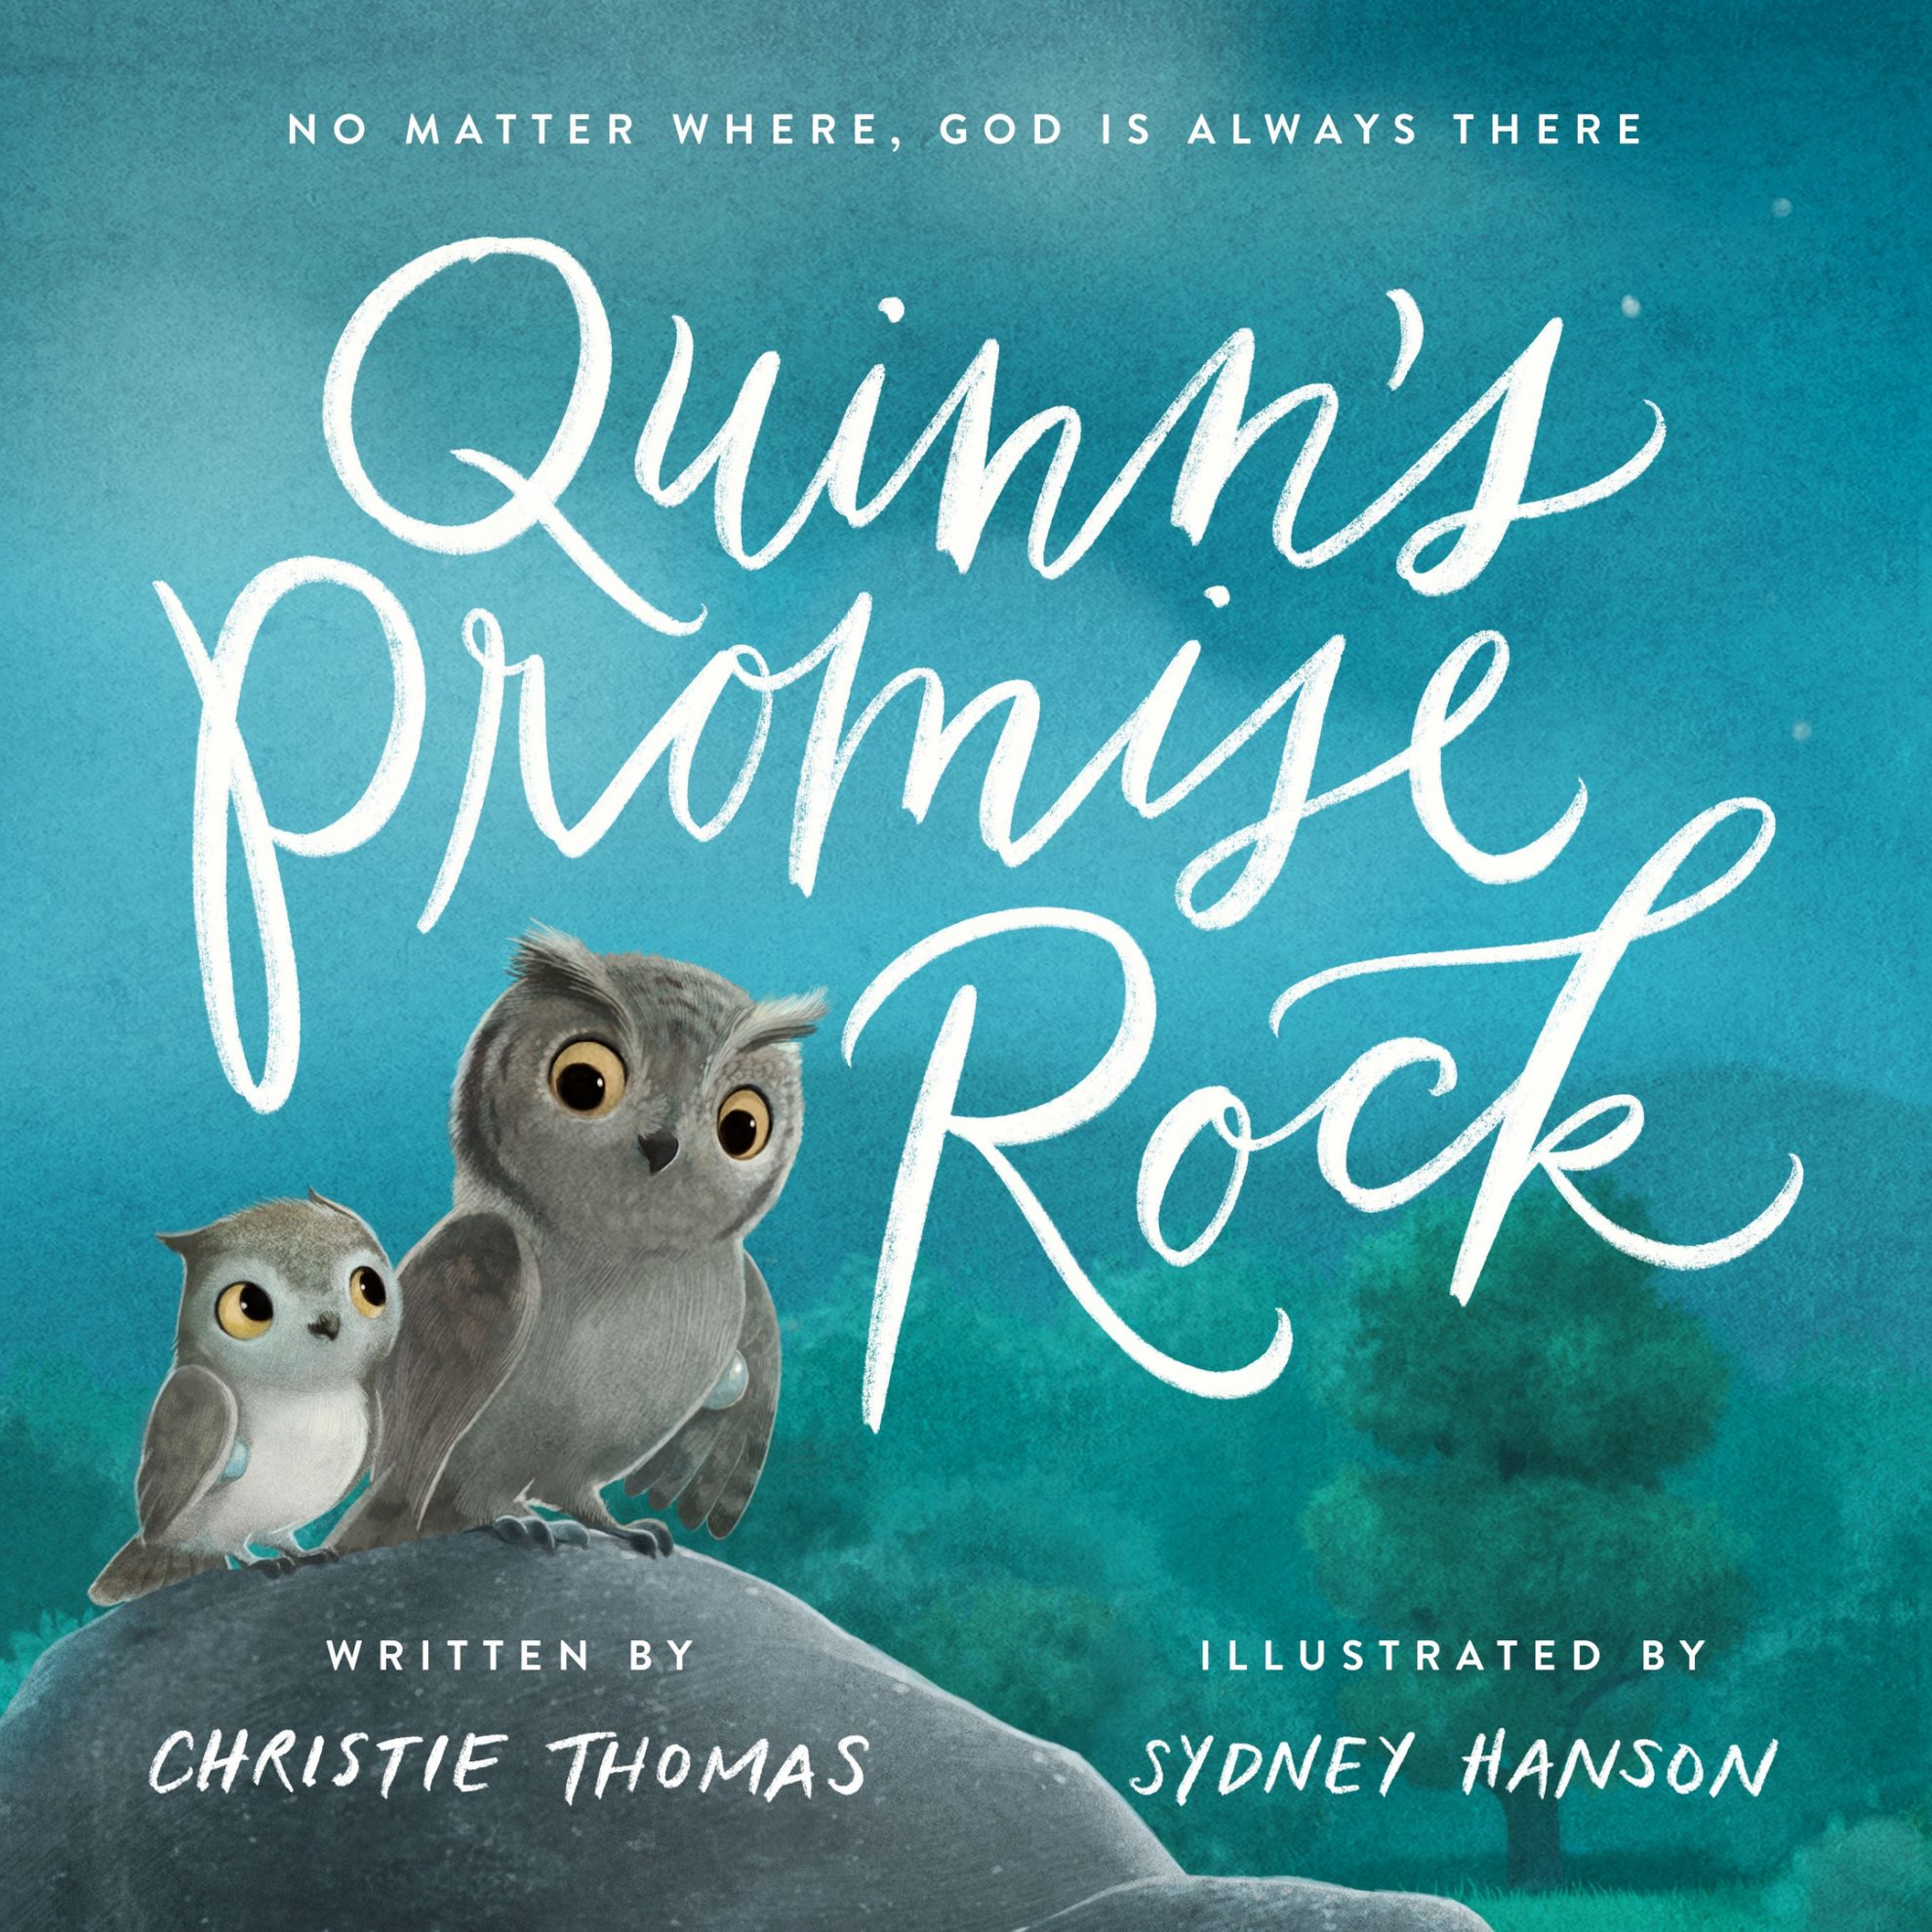 A picture book for to help with childhood anxiety from a Christian faith perspective | Christian parenting | Quinn's Promise Rock | Spiritual growth for children #Christianparenting #faithathome #Christianmom #hopegrownfaith #kidlit #childrensbook